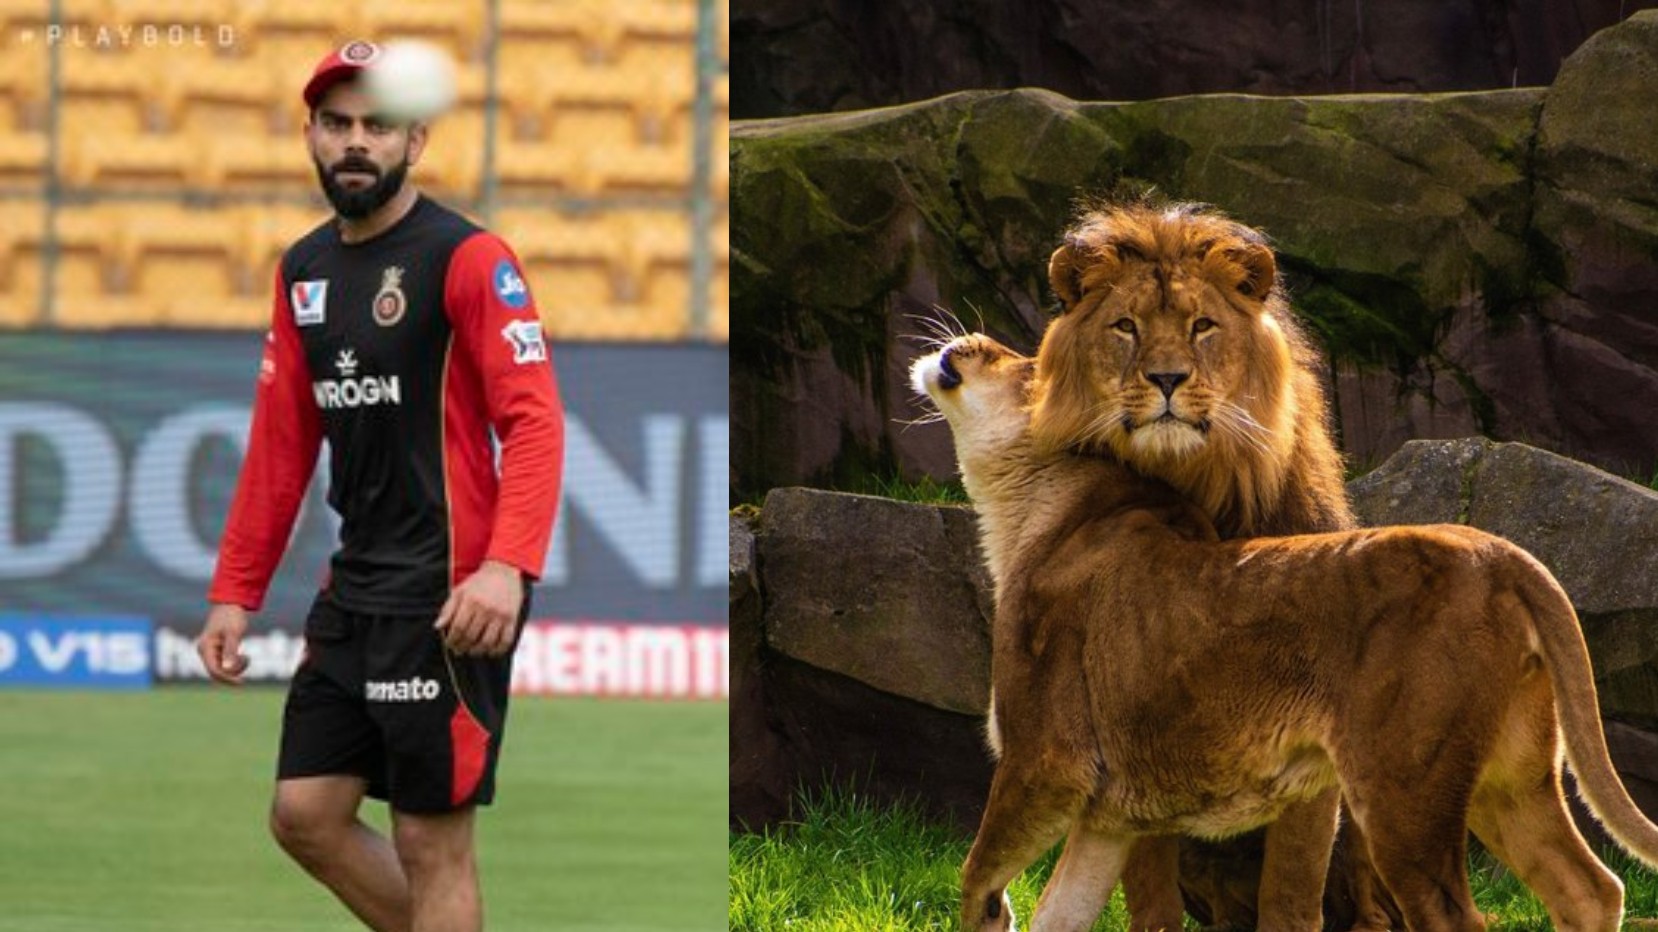 “What have you done to your hair,” CSK exclaim after RCB compares Virat Kohli to a Lion